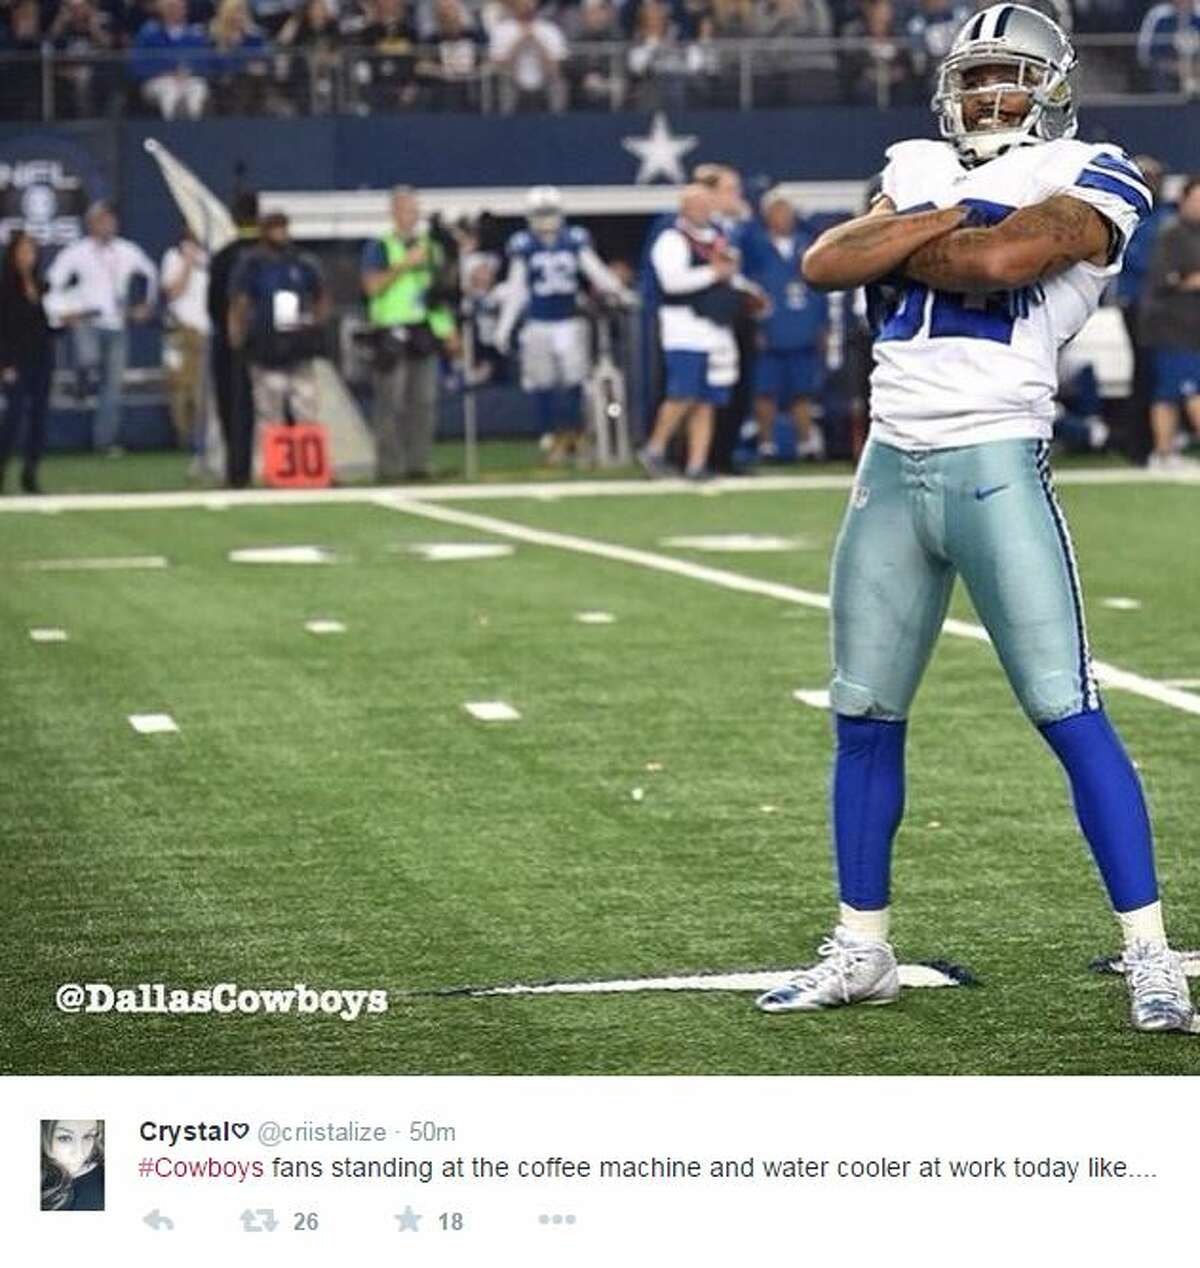 "#Cowboys fans standing at the coffee machine and water cooler at work today like....," @crisistalize